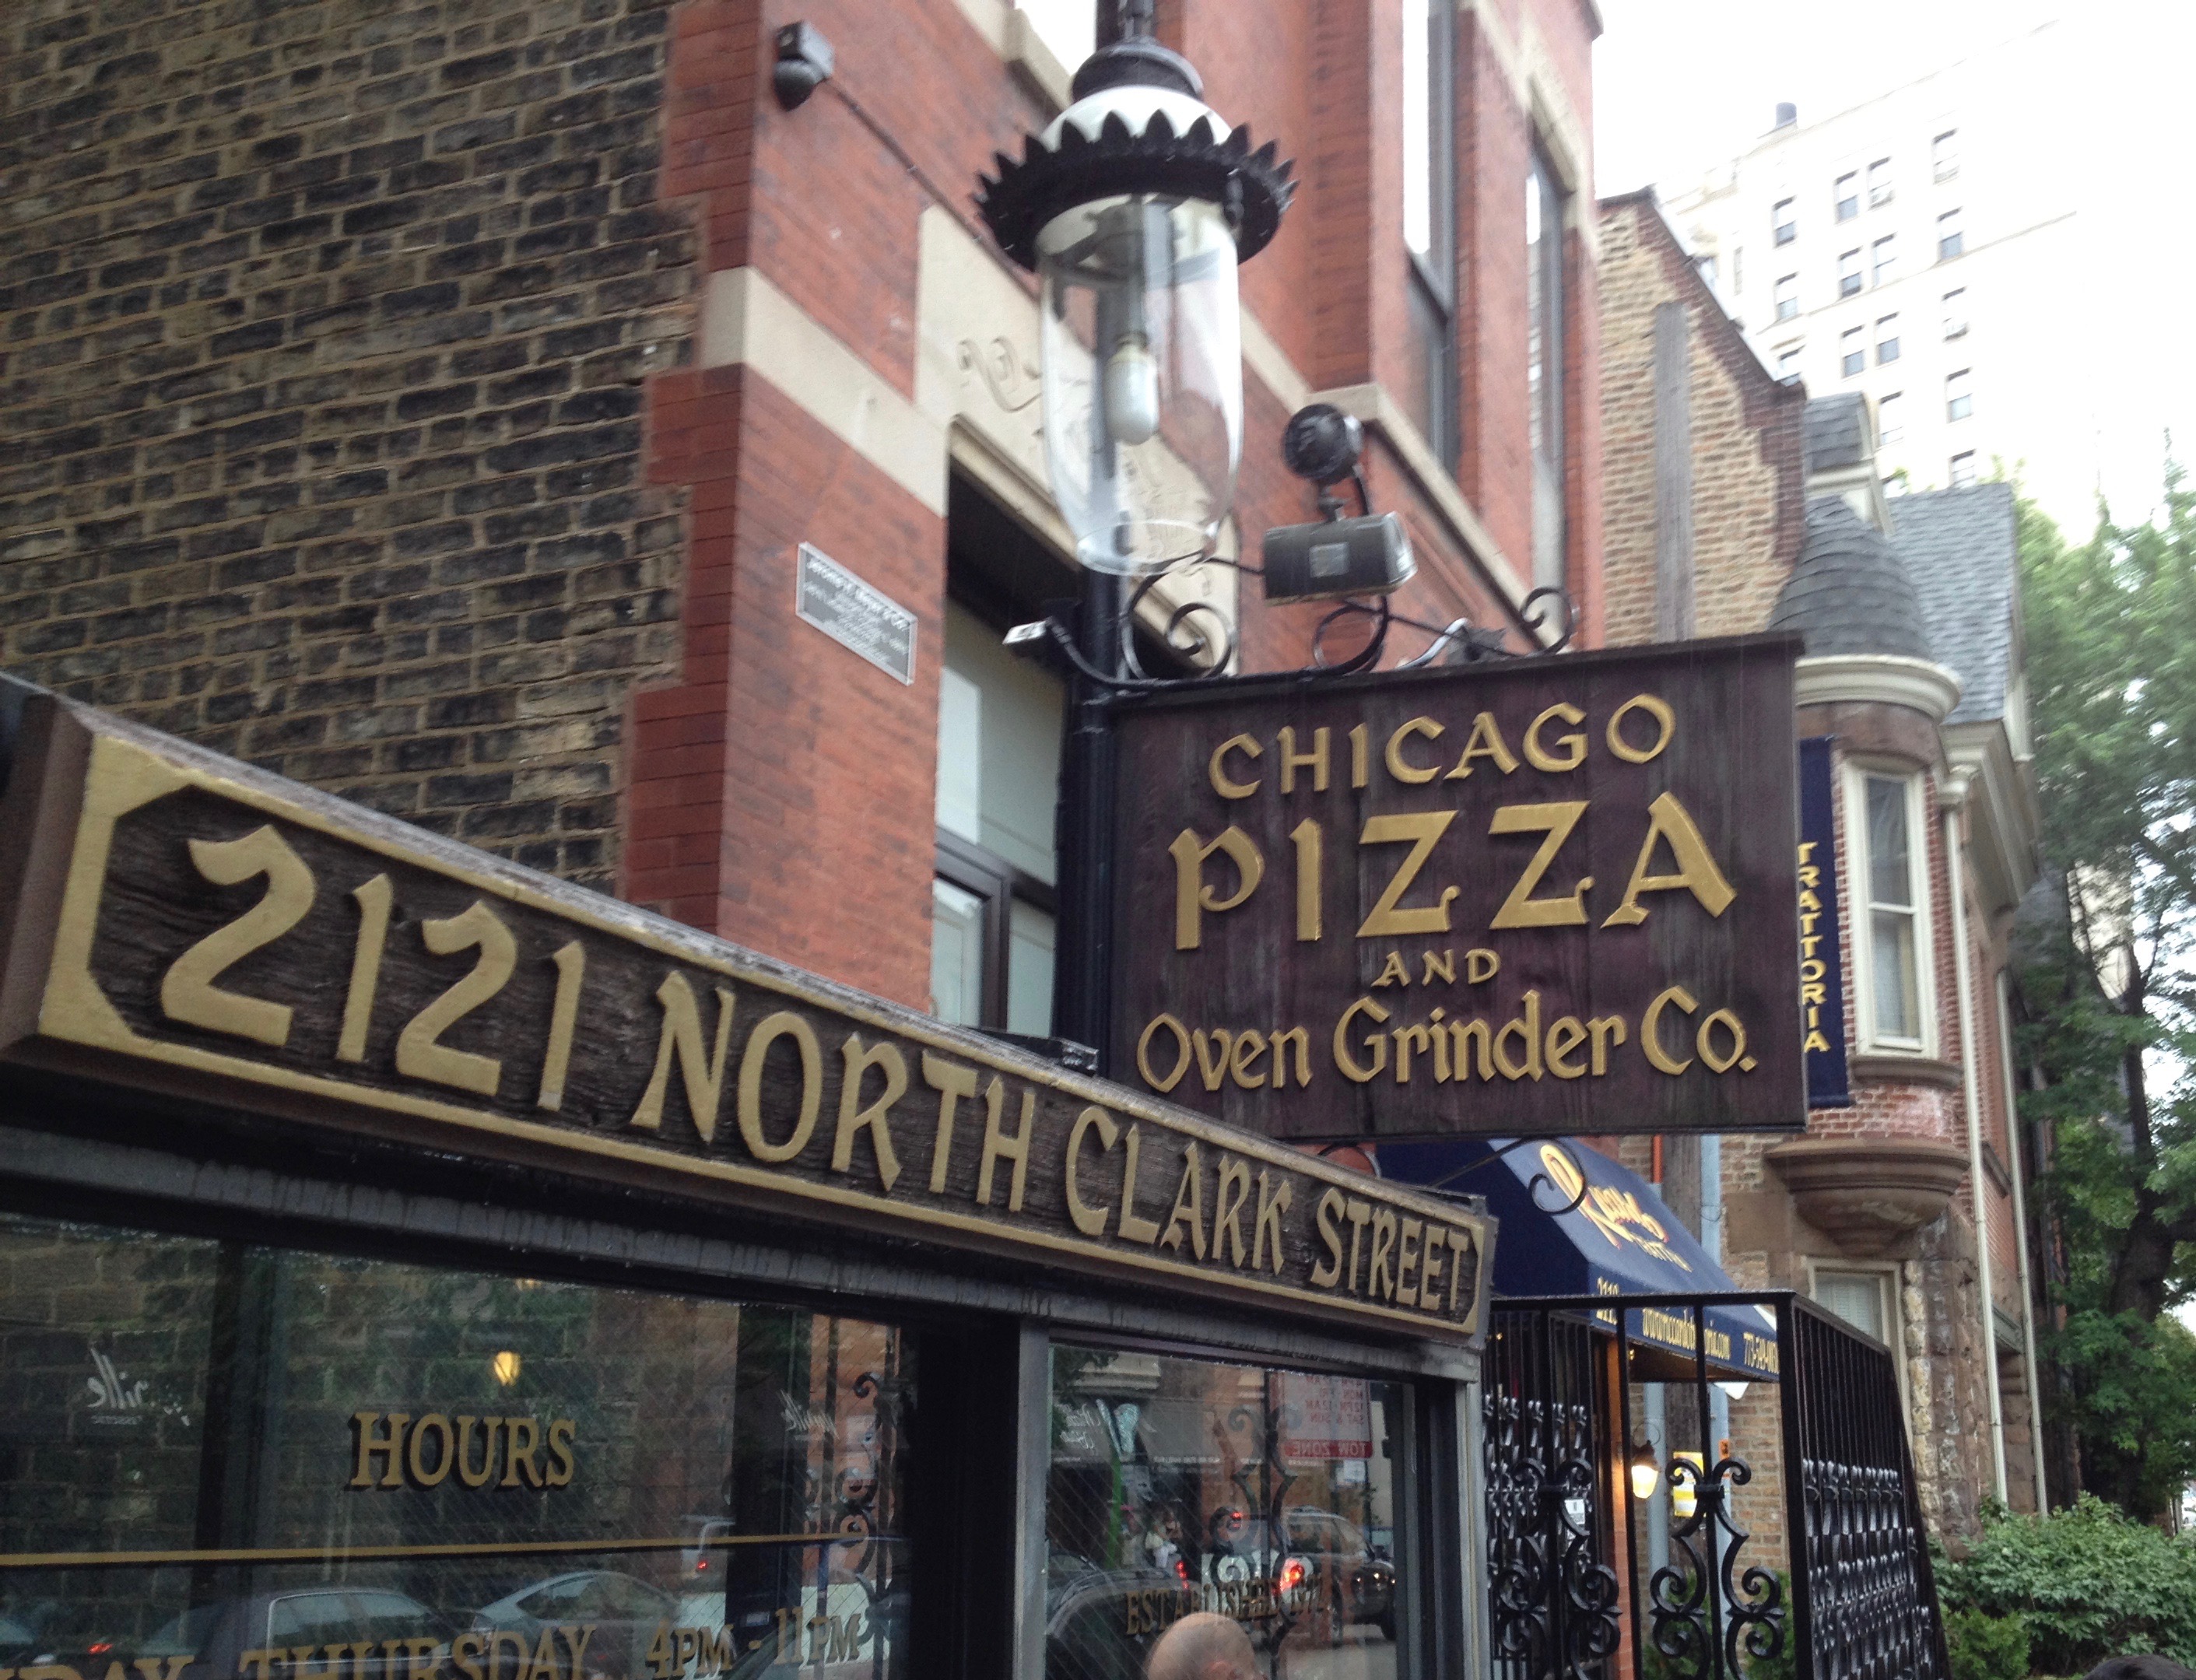 Chicago Pizza and Oven Grinder, 2121 N. Clark St. in Lincoln Park.